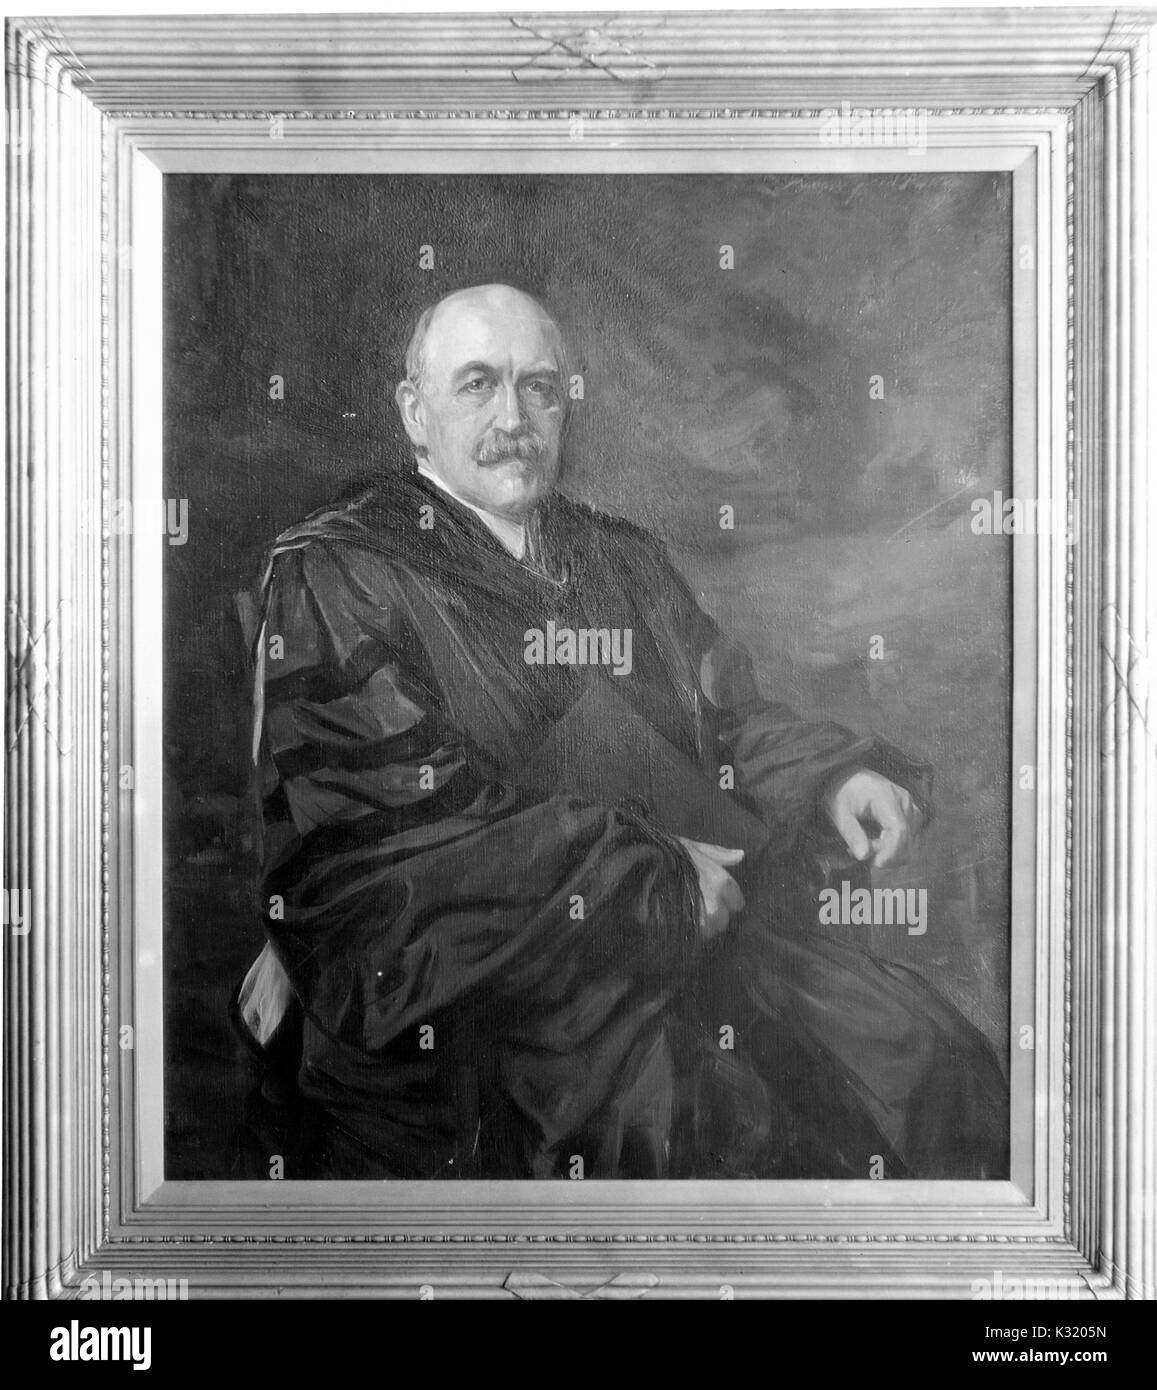 A painting of William Bullock Clark, a professor of geology at Johns Hopkins University, sitting and wearing a dark robe, 1918. Stock Photo